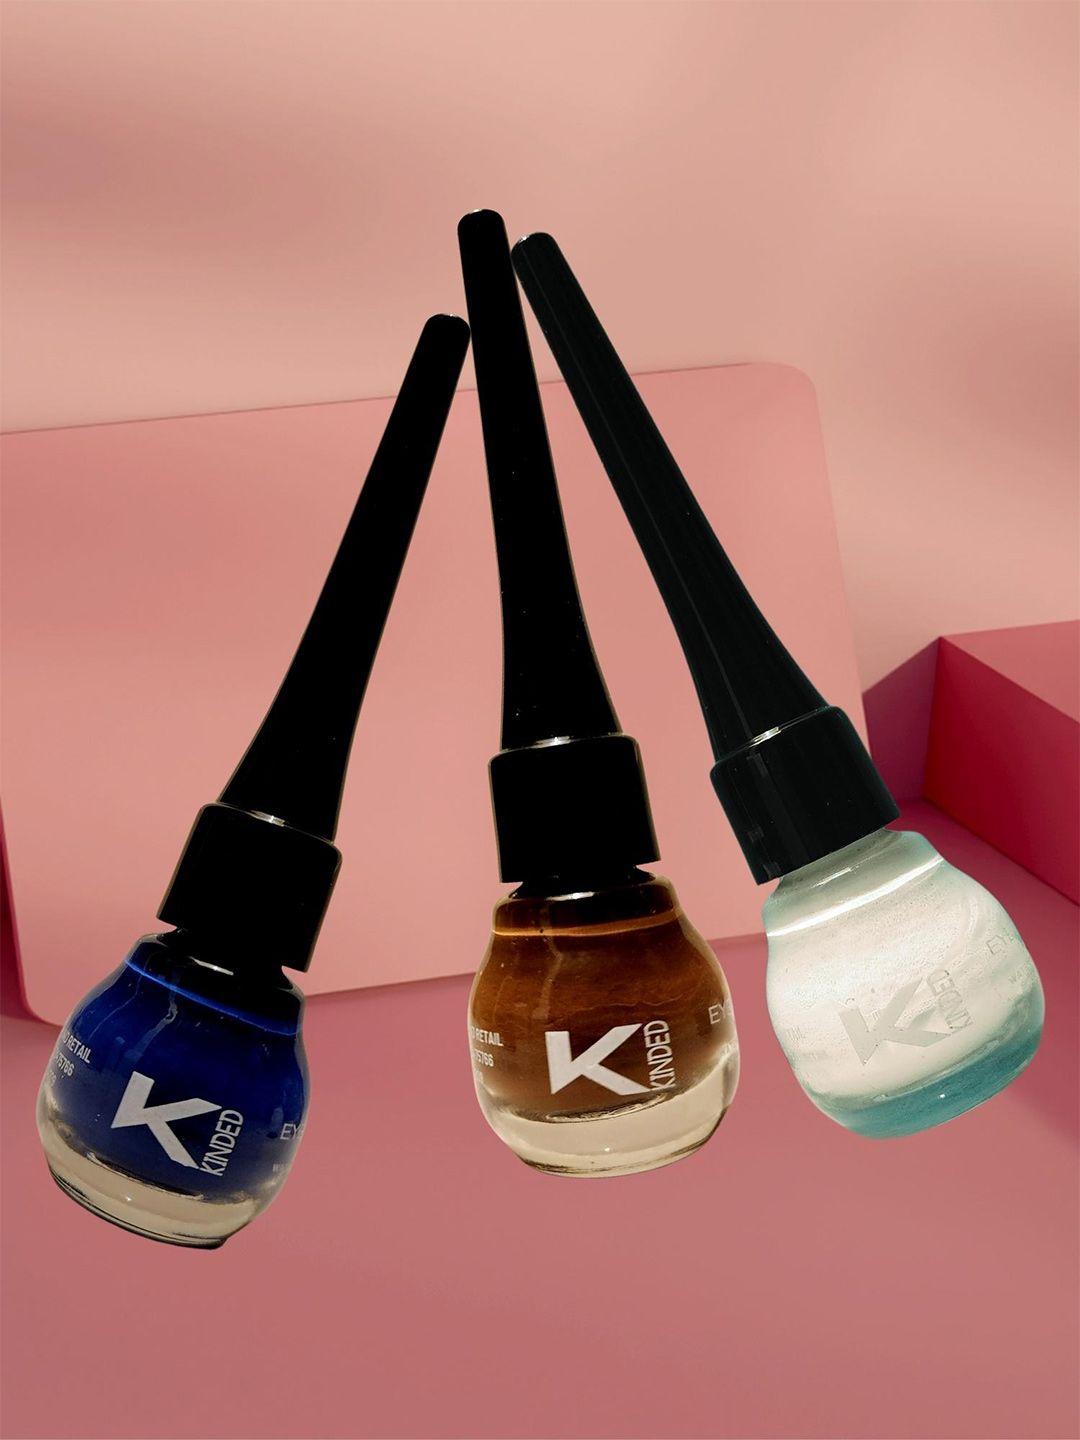 kinded set of 3 liquid eye liner 5ml each - chocolate brown, royal blue & white pearl